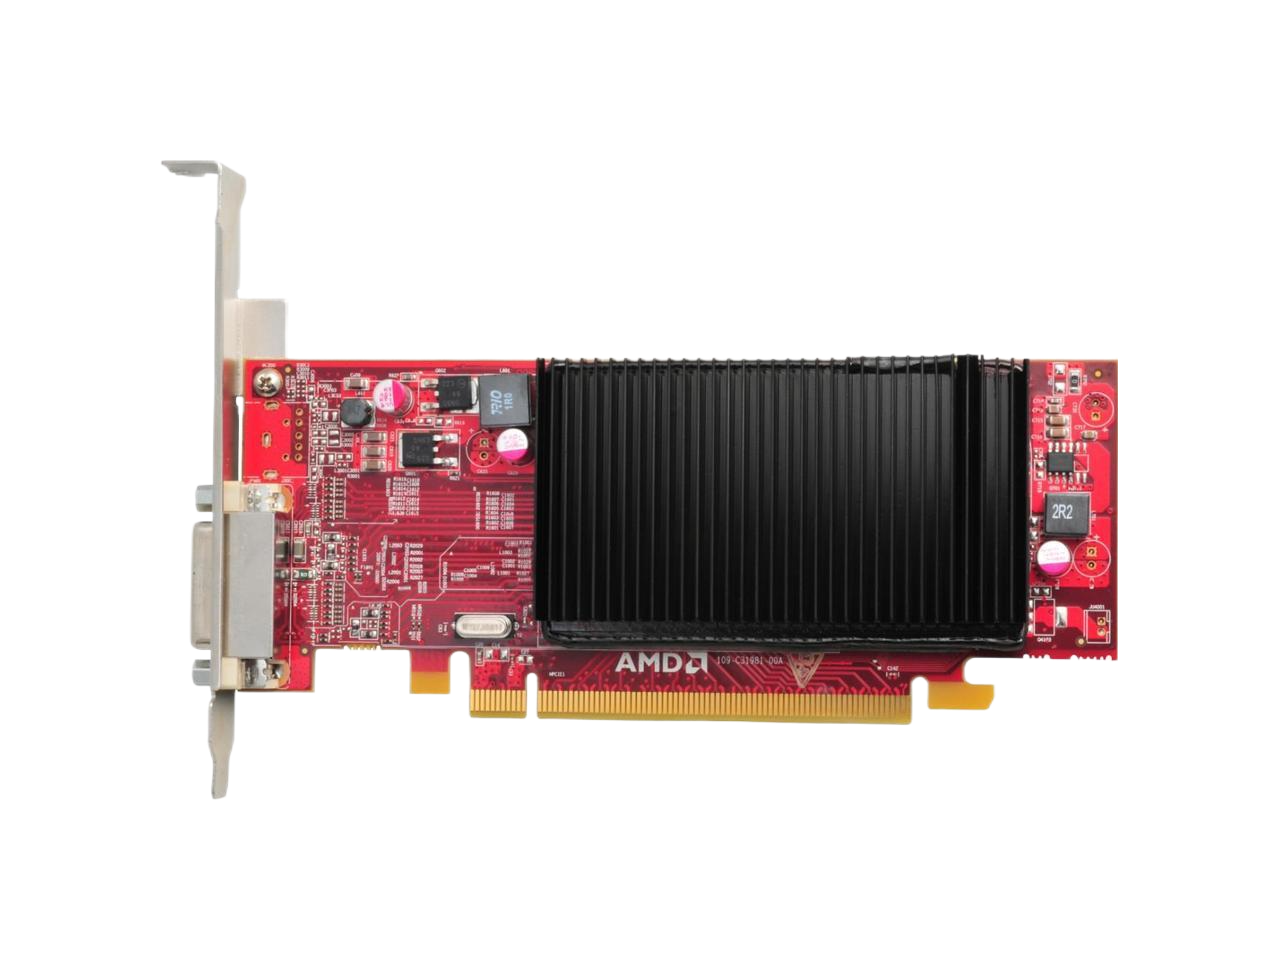 AMD FirePro 2270 512MB PCI Express x1 Half-length/Low-profile Workstation Graphics Card 100-505652